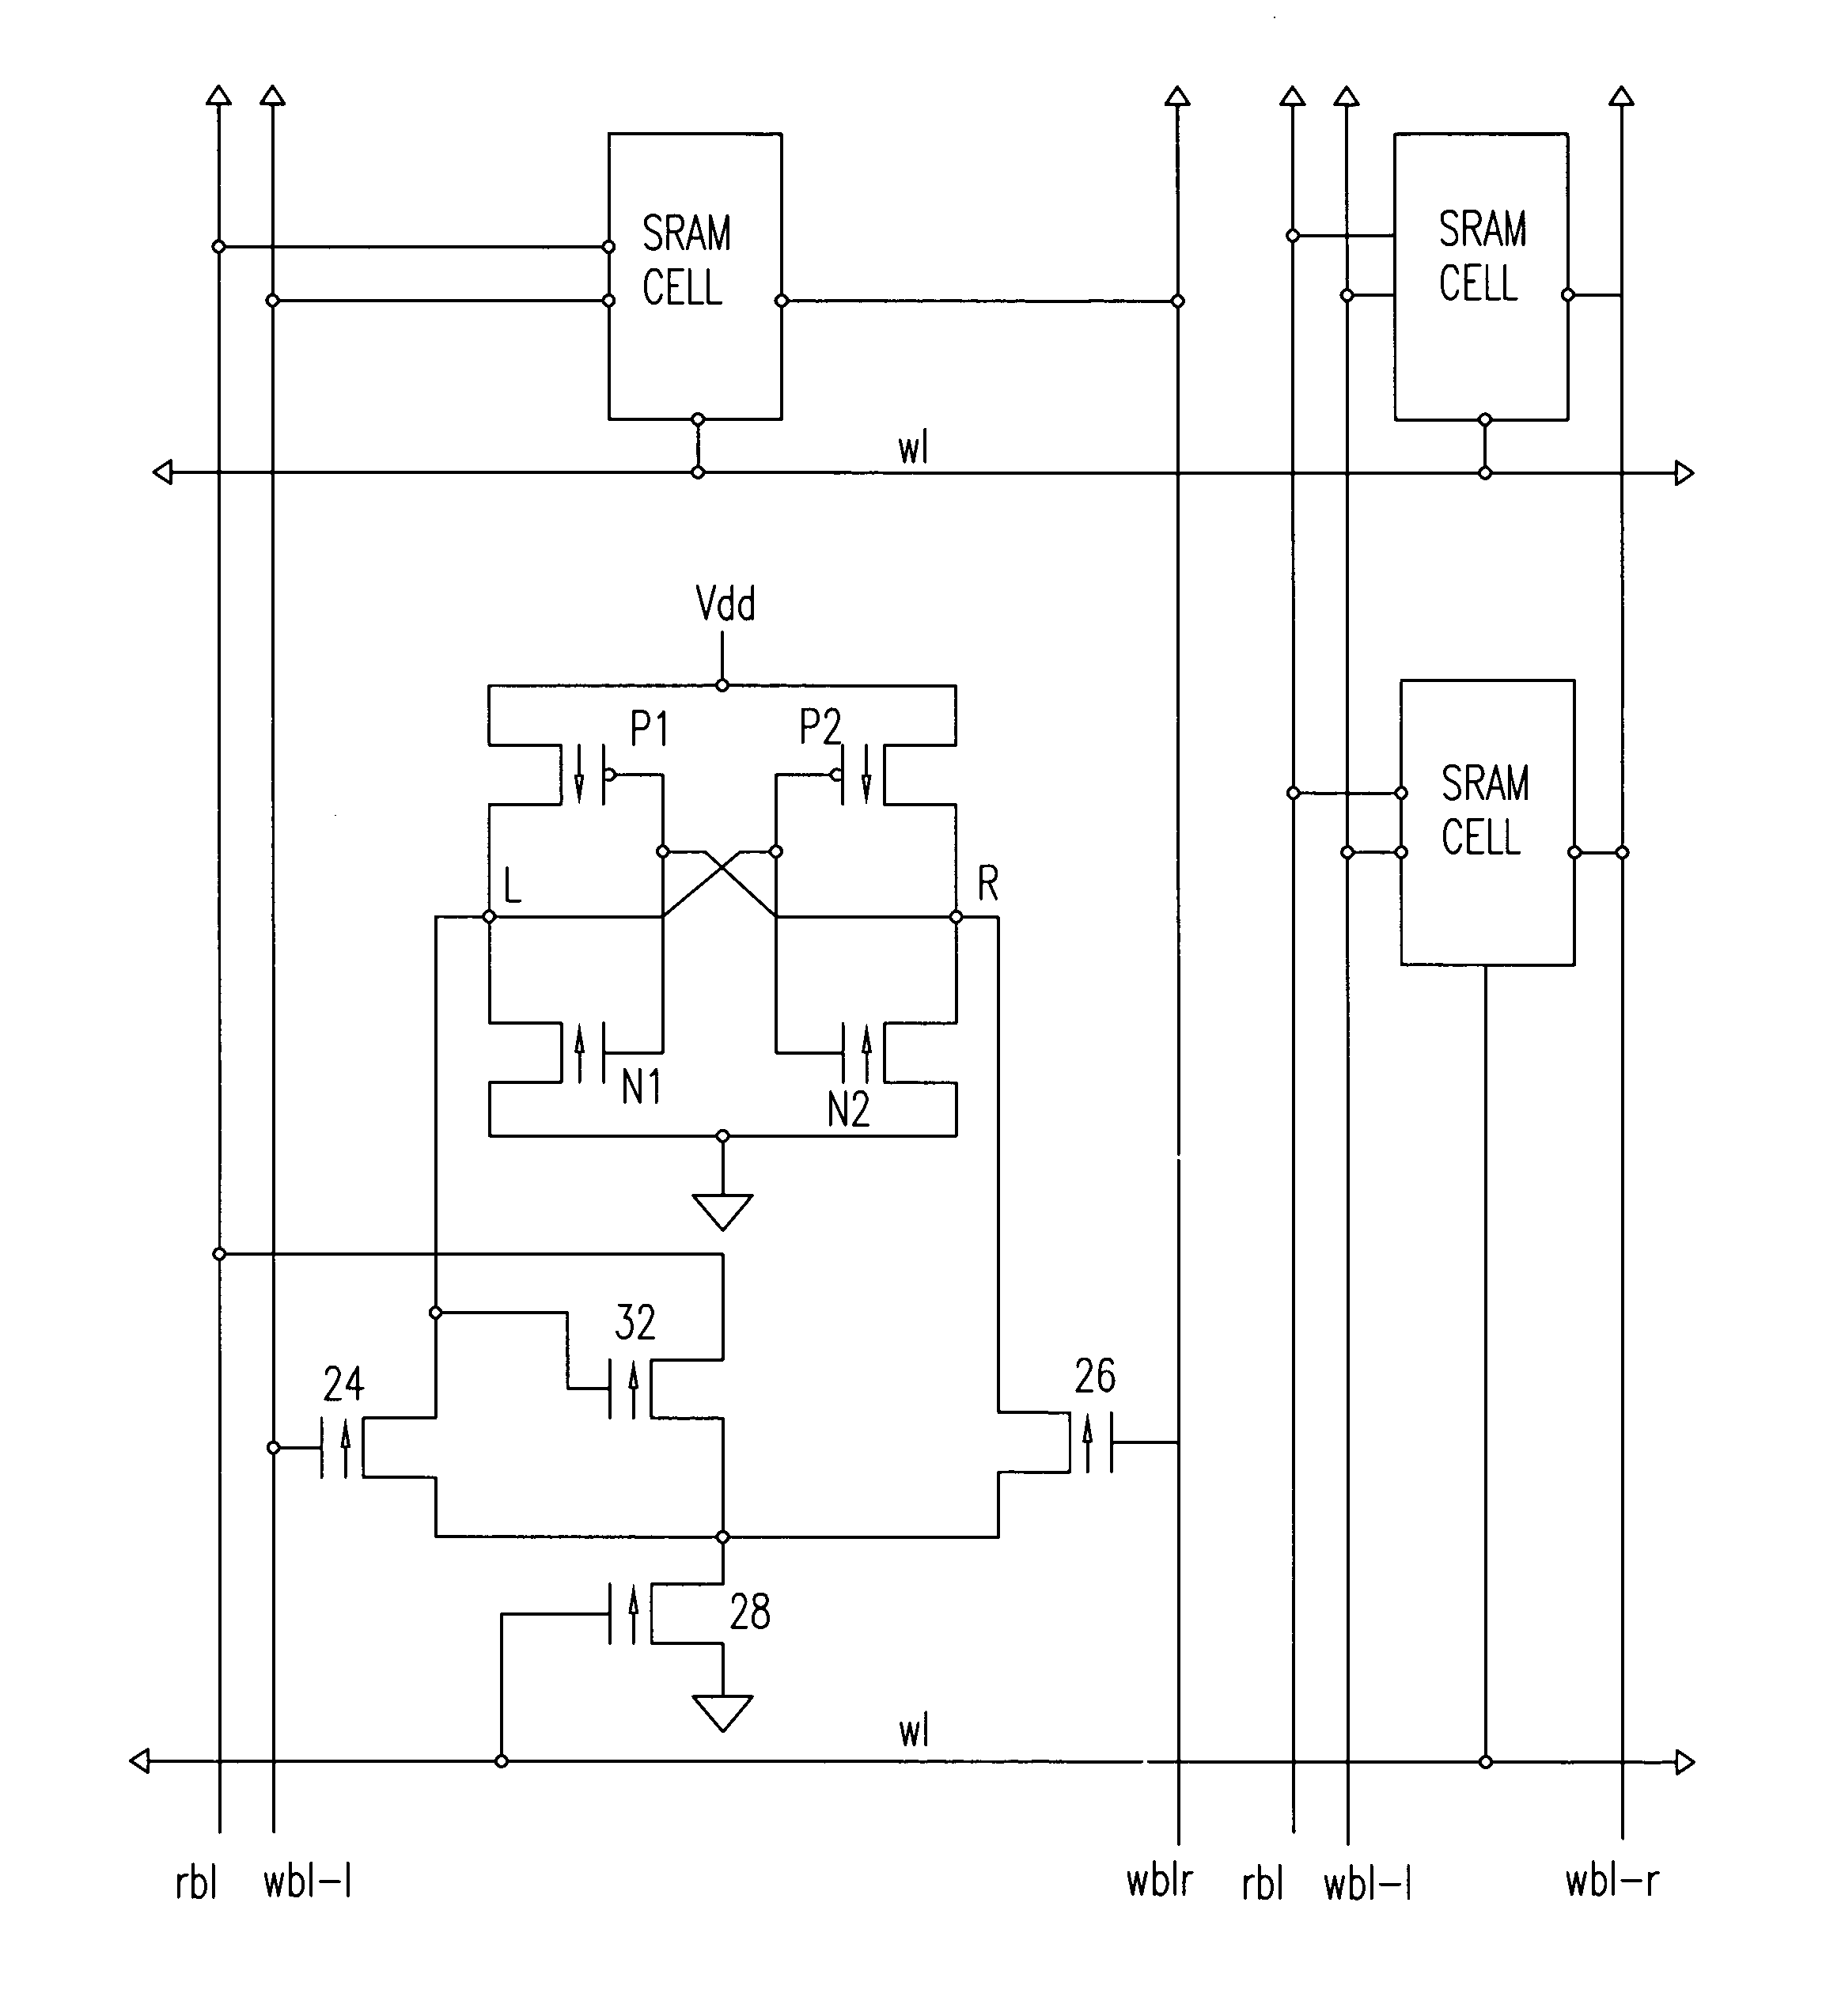 Eight transistor SRAM cell with improved stability requiring only one word line